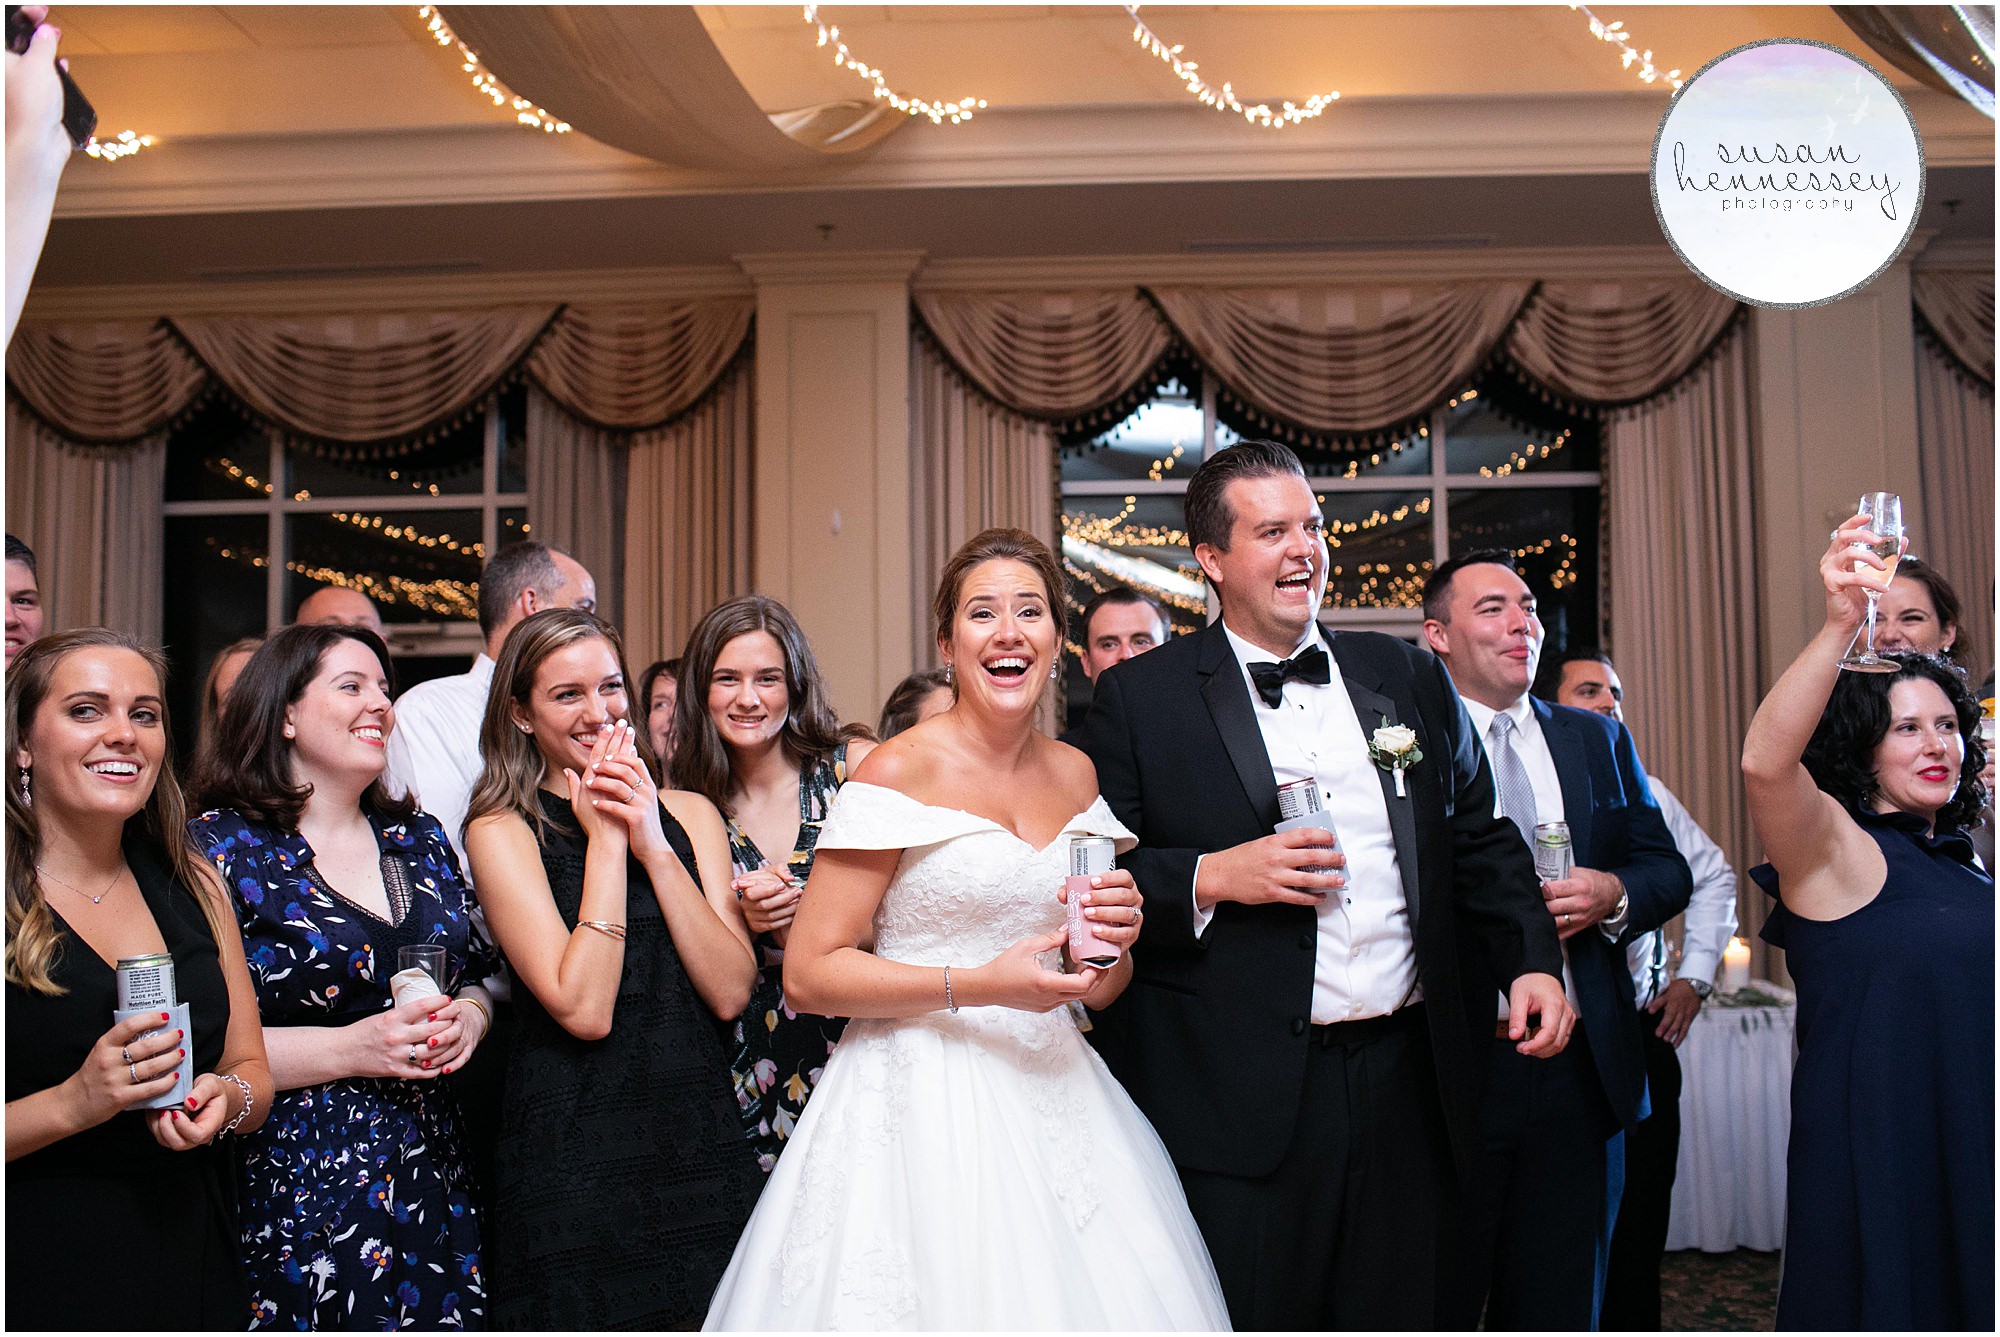 Bride and groom have fun at rehoboth beach country club wedding reception